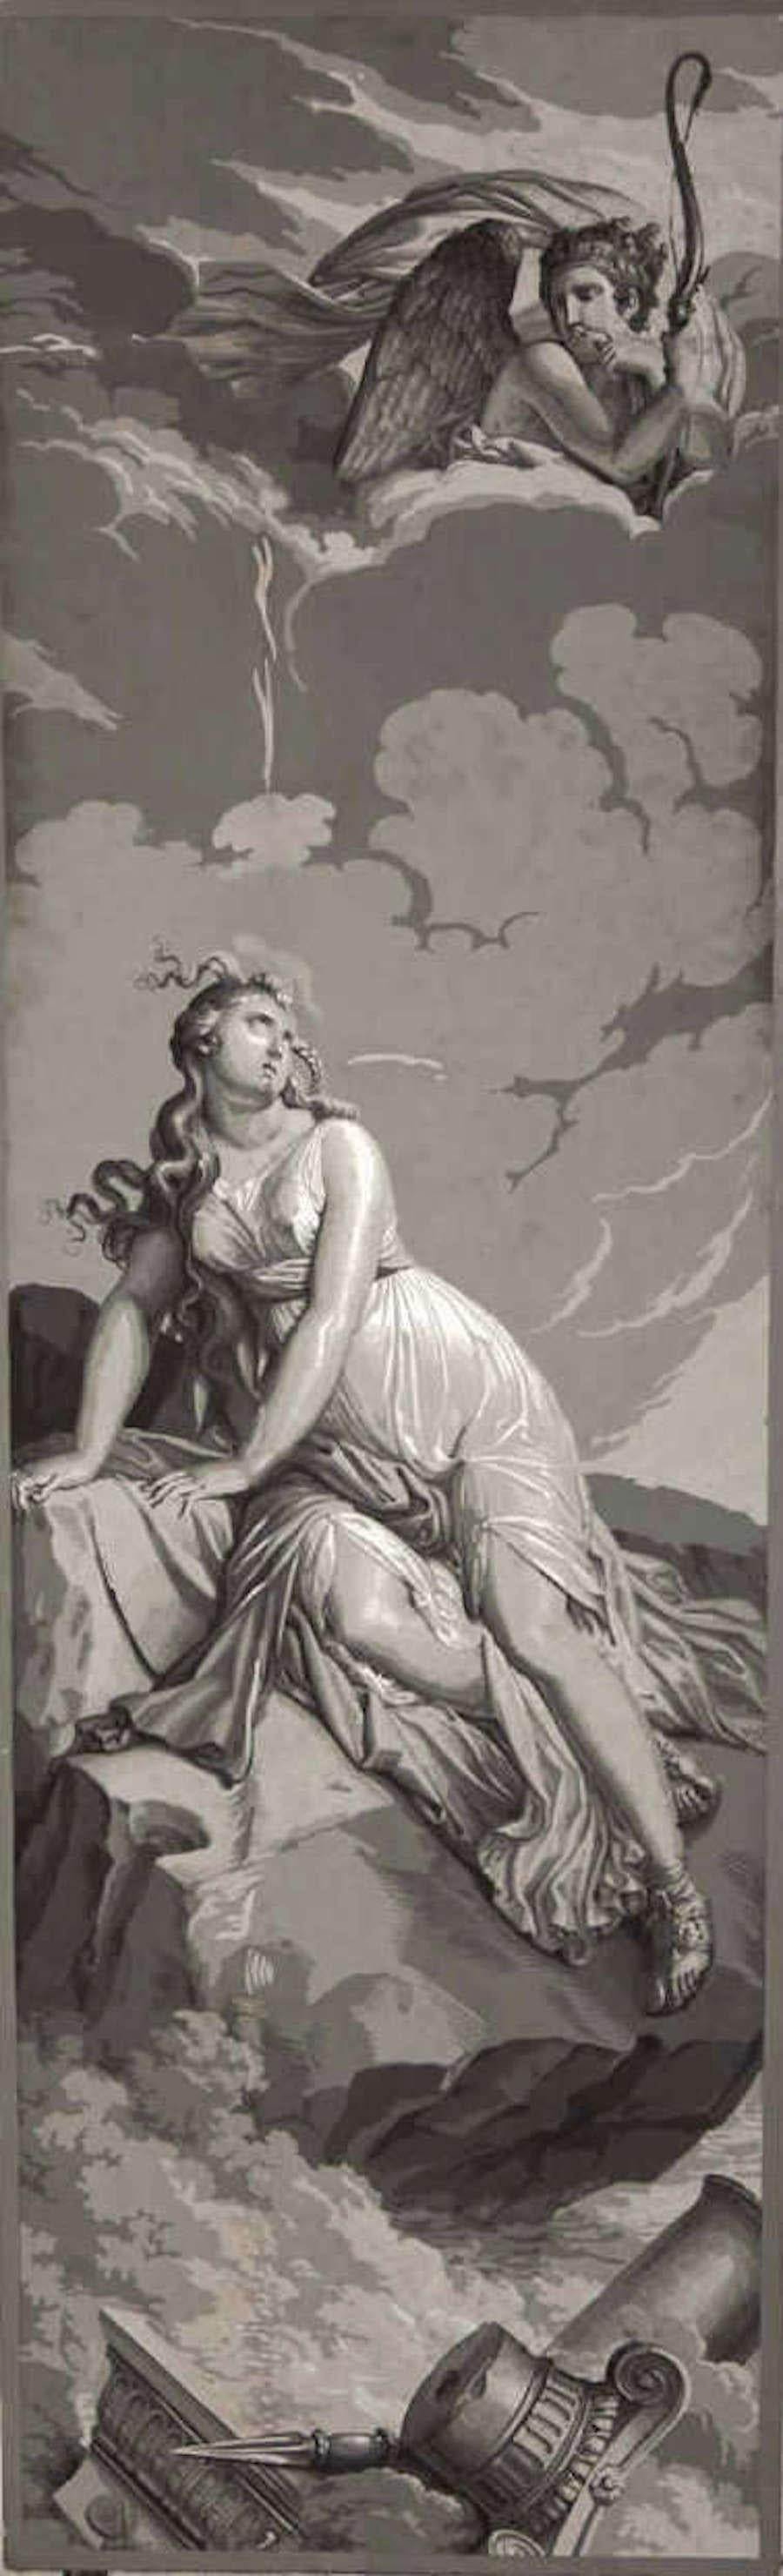 Five Wall Decoration 'En Grisaille' by Dufour, Paris, France, 19th Century - Gray Interior Painting by Unknown